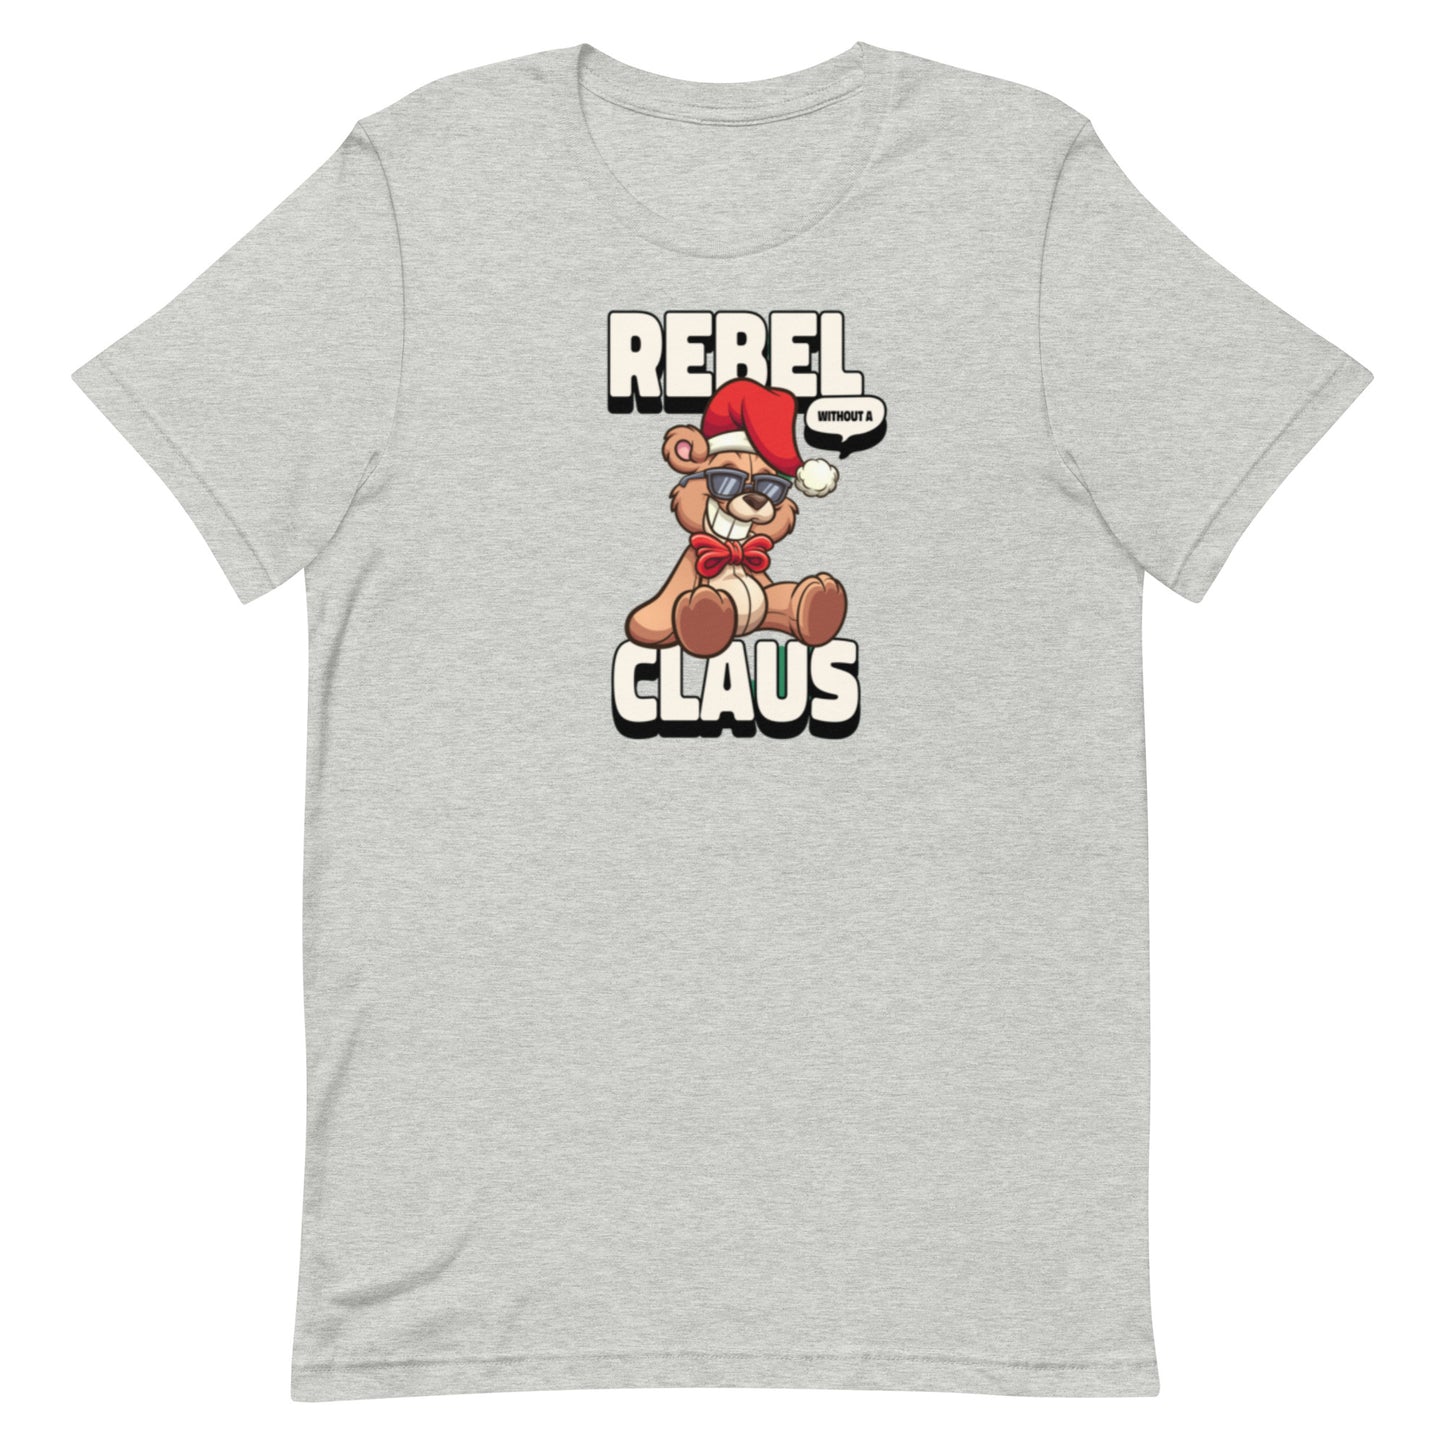 Holiday  T-shirt in Rebel Claus